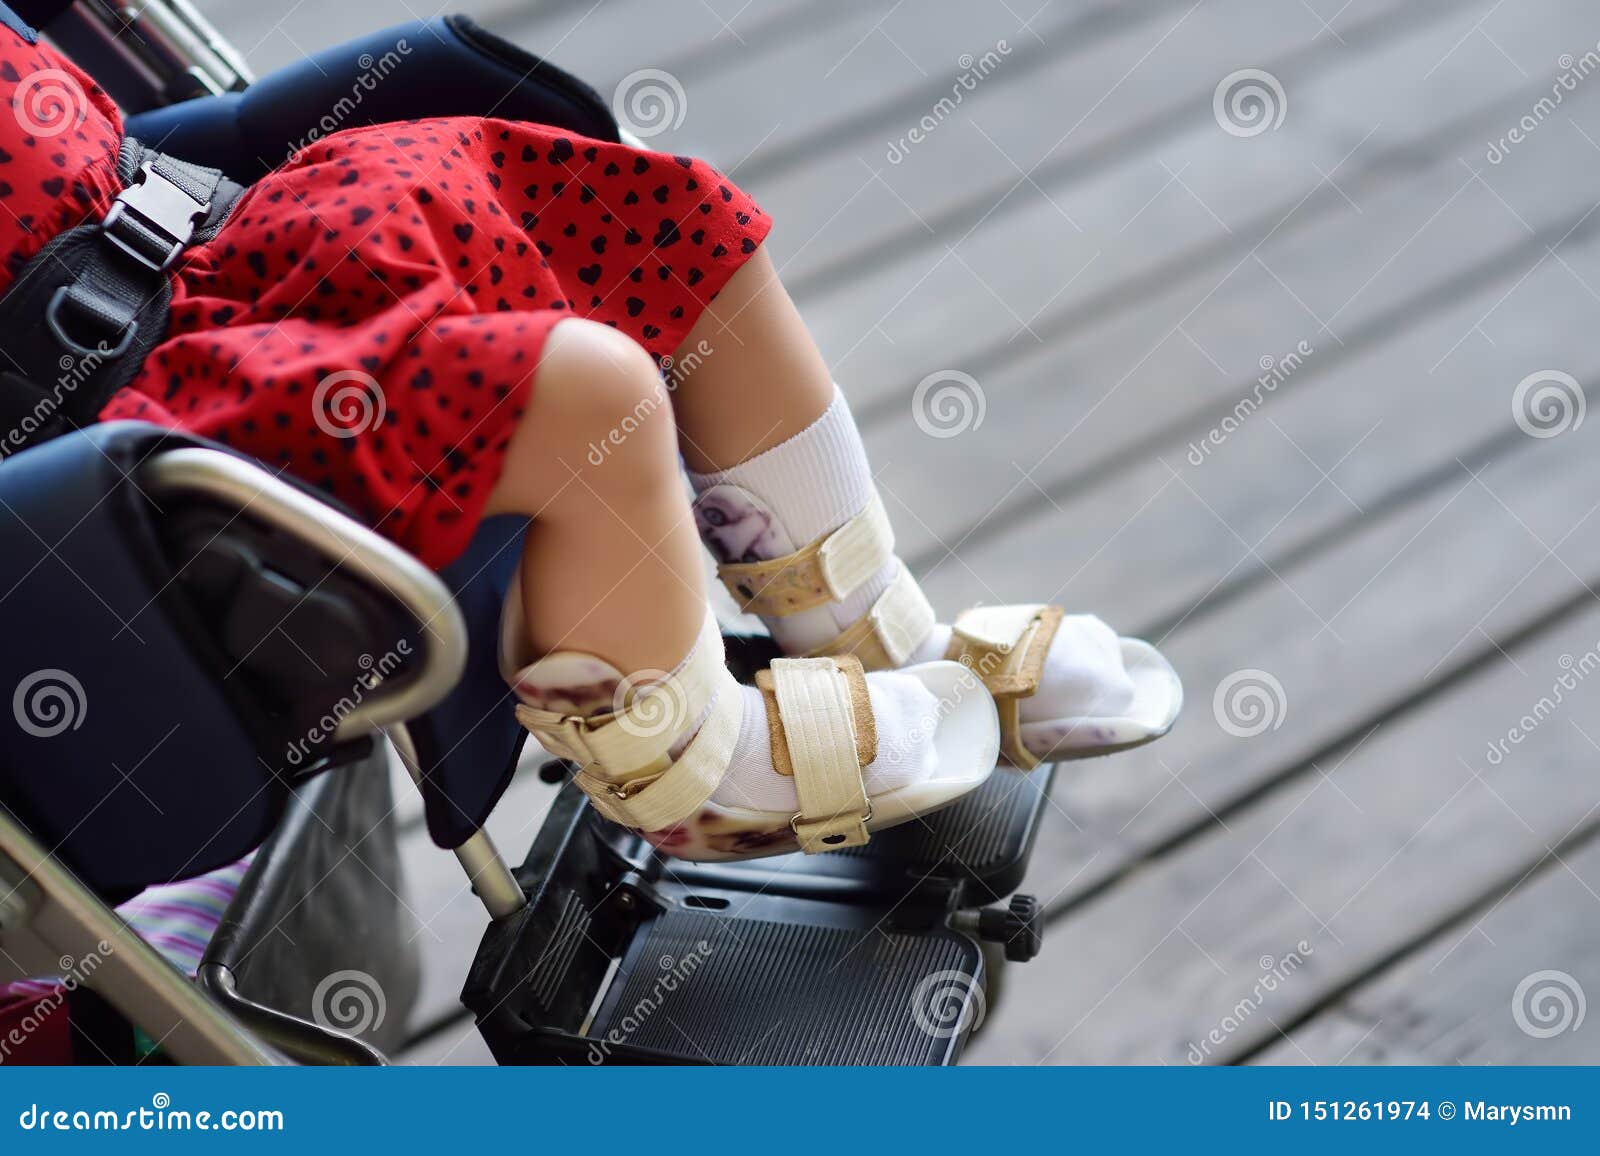 disabled girl sitting in wheelchair. on her legs orthosis. child cerebral palsy. inclusion